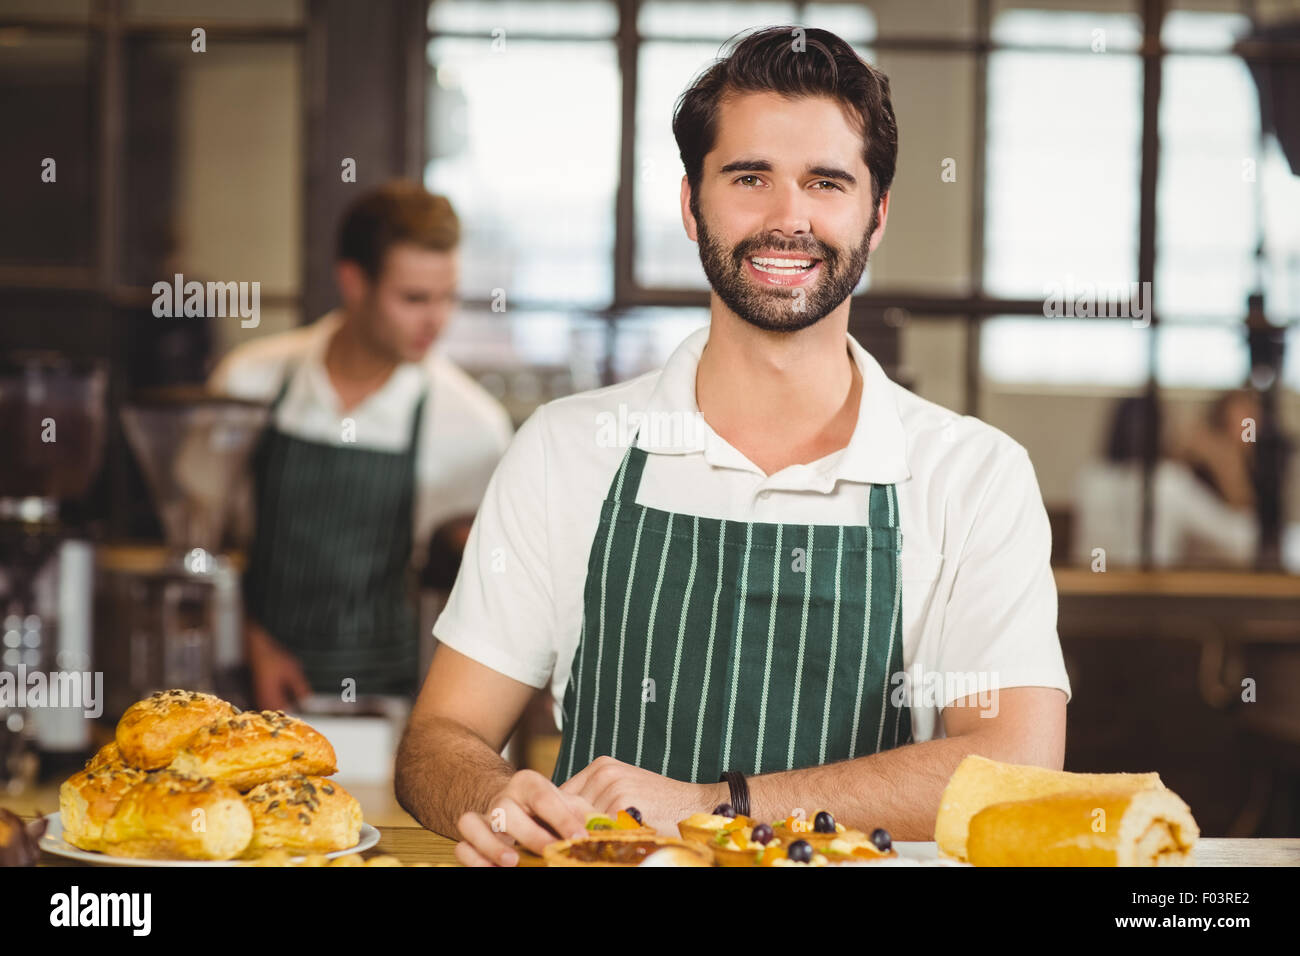 Smiling waiter tidying up the pastries Stock Photo